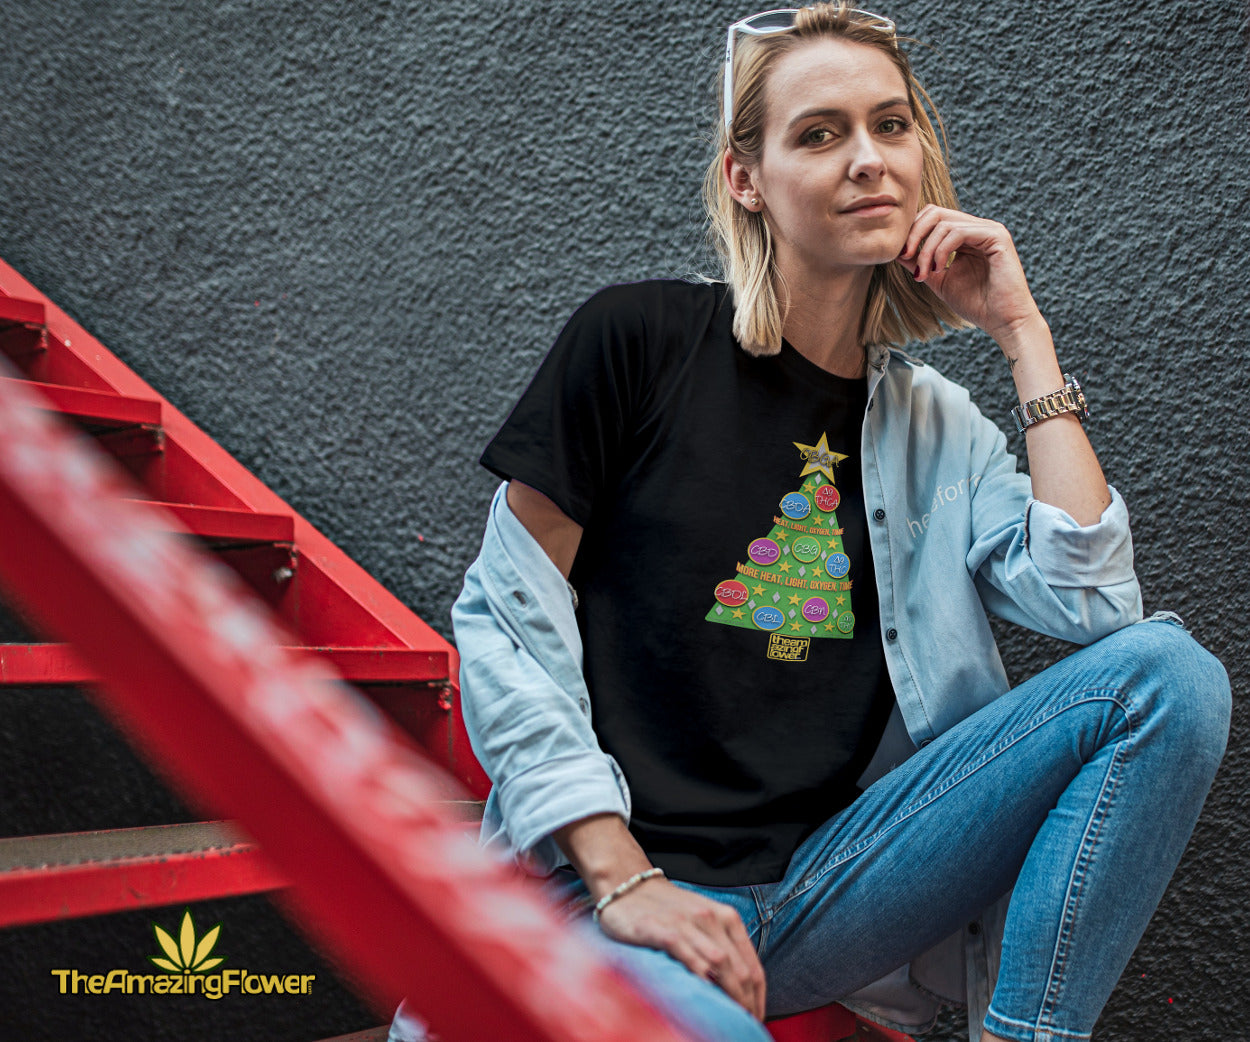 Cannabinoid Holiday Tree Women's Black T-Shirt worn by a blonde woman in jeans sitting on red metal stairs. 